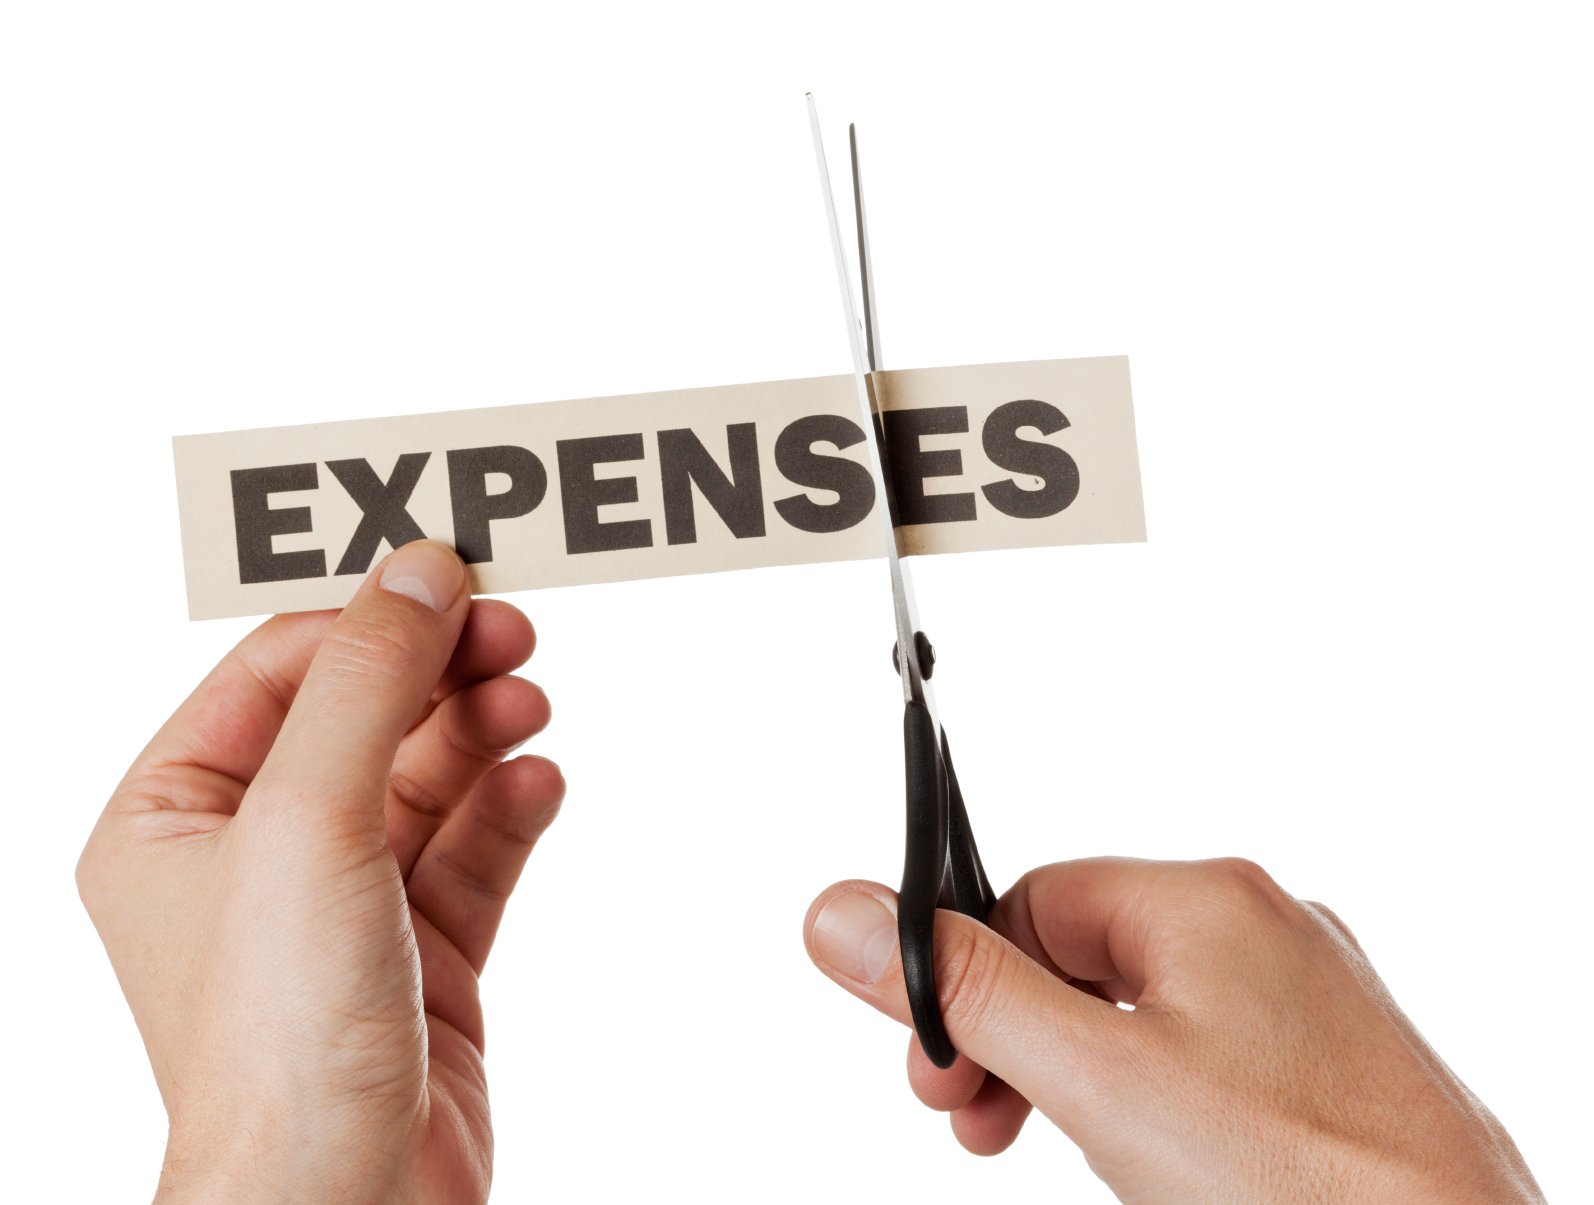 How to cut out expenses